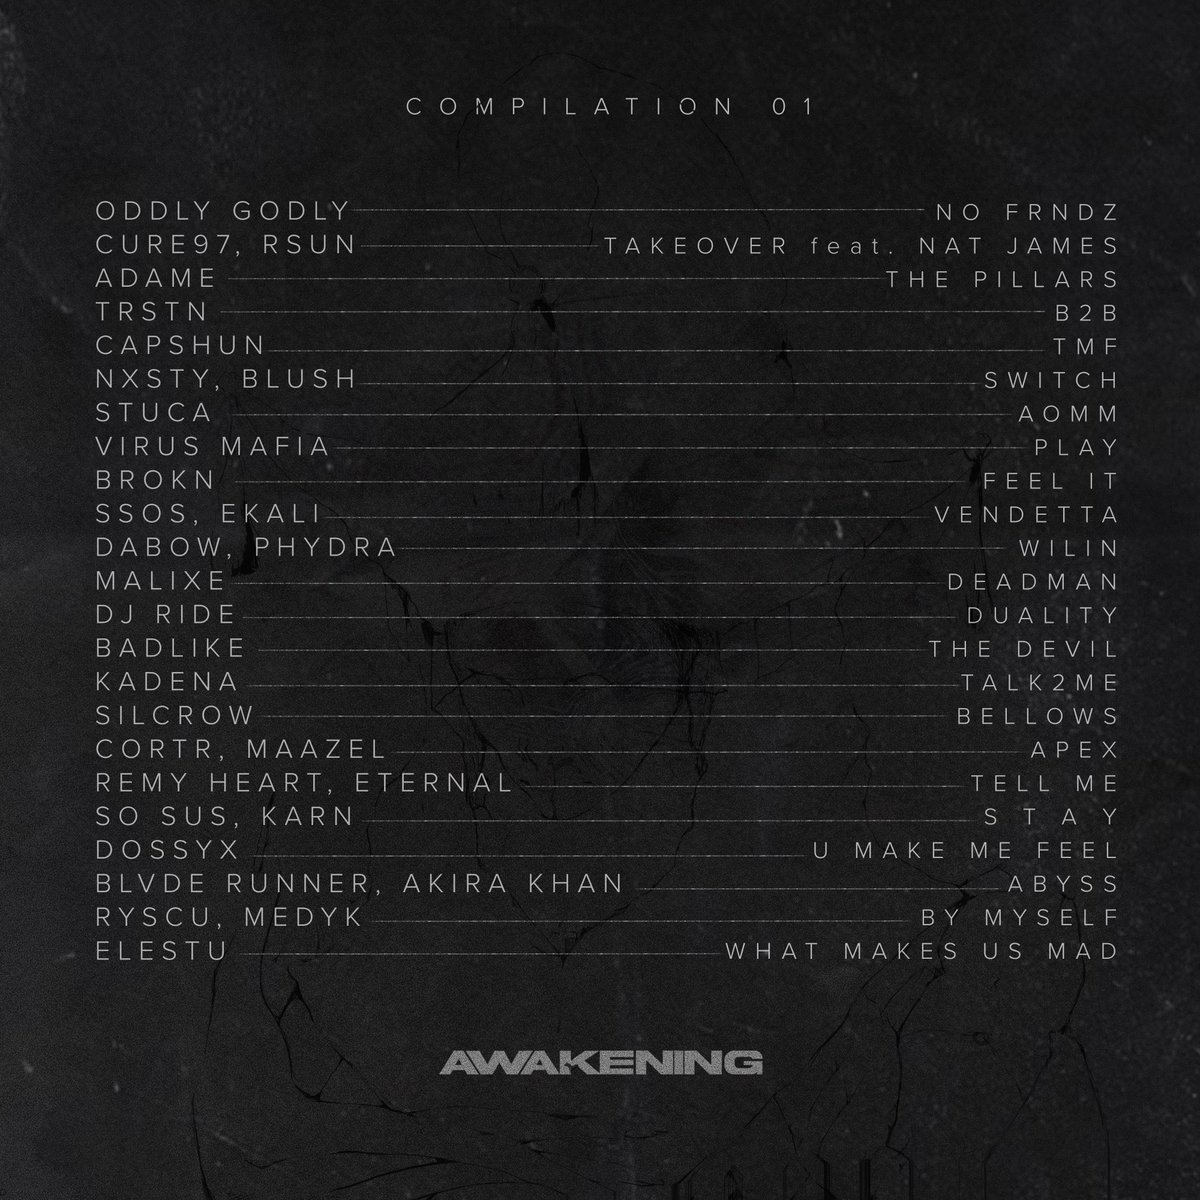 AWAKENING COMPILATION 01 TRACKLIST I've been working on this project relentlessly for the last year. The goal was to find the best artists in the underground scene and put together an album that plays like an Awakening Mix front to back - spanning multiple genres and emotions. I…